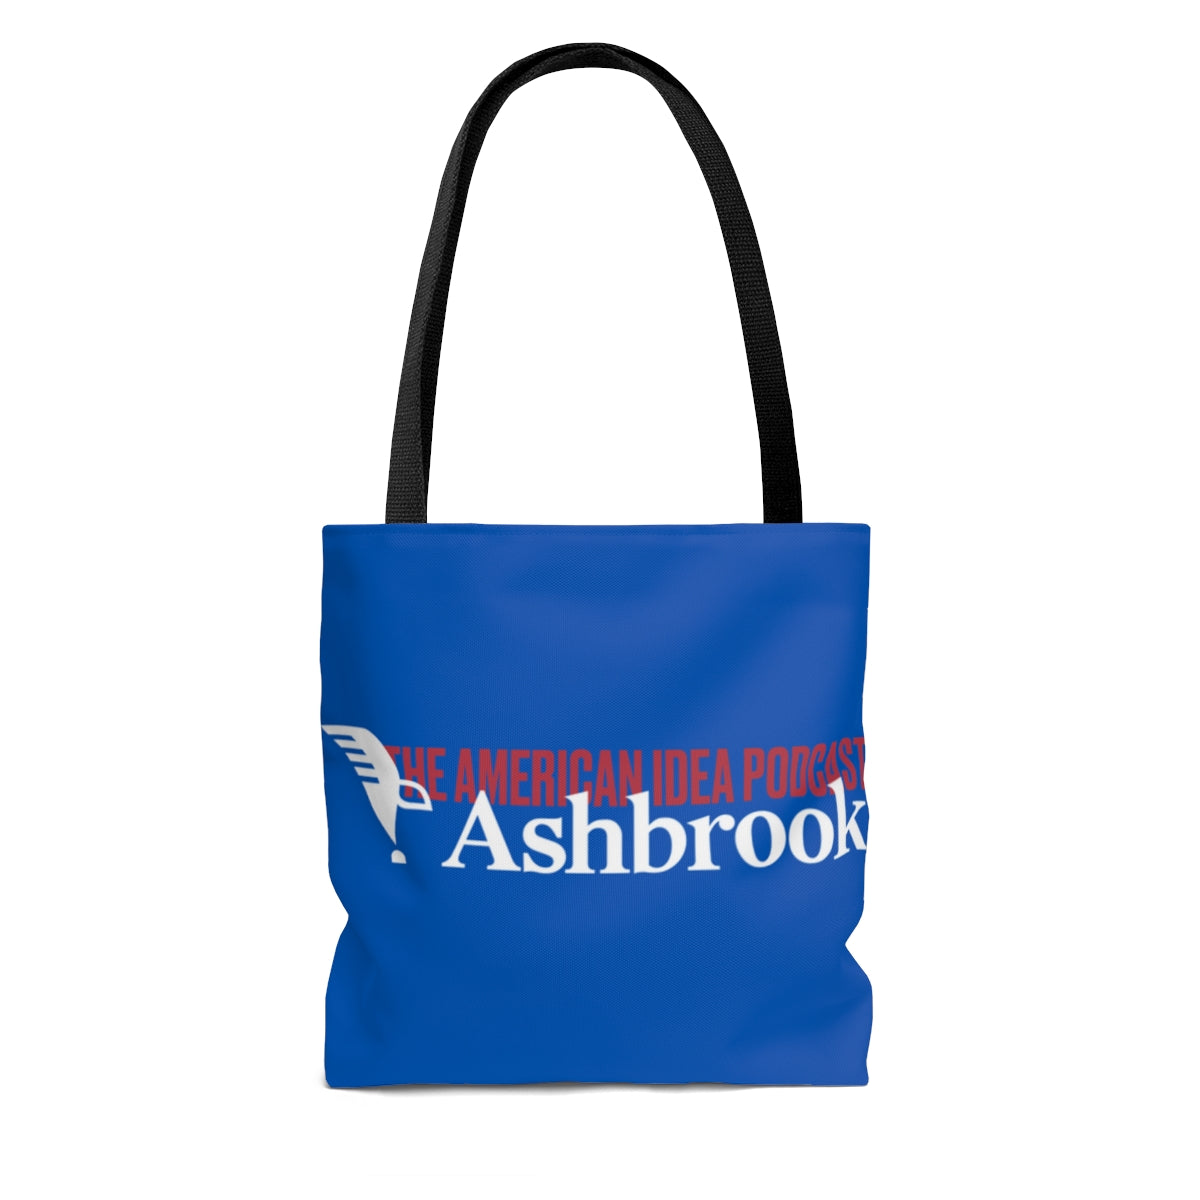 The American Idea Tote Bag--Reflection and Choice